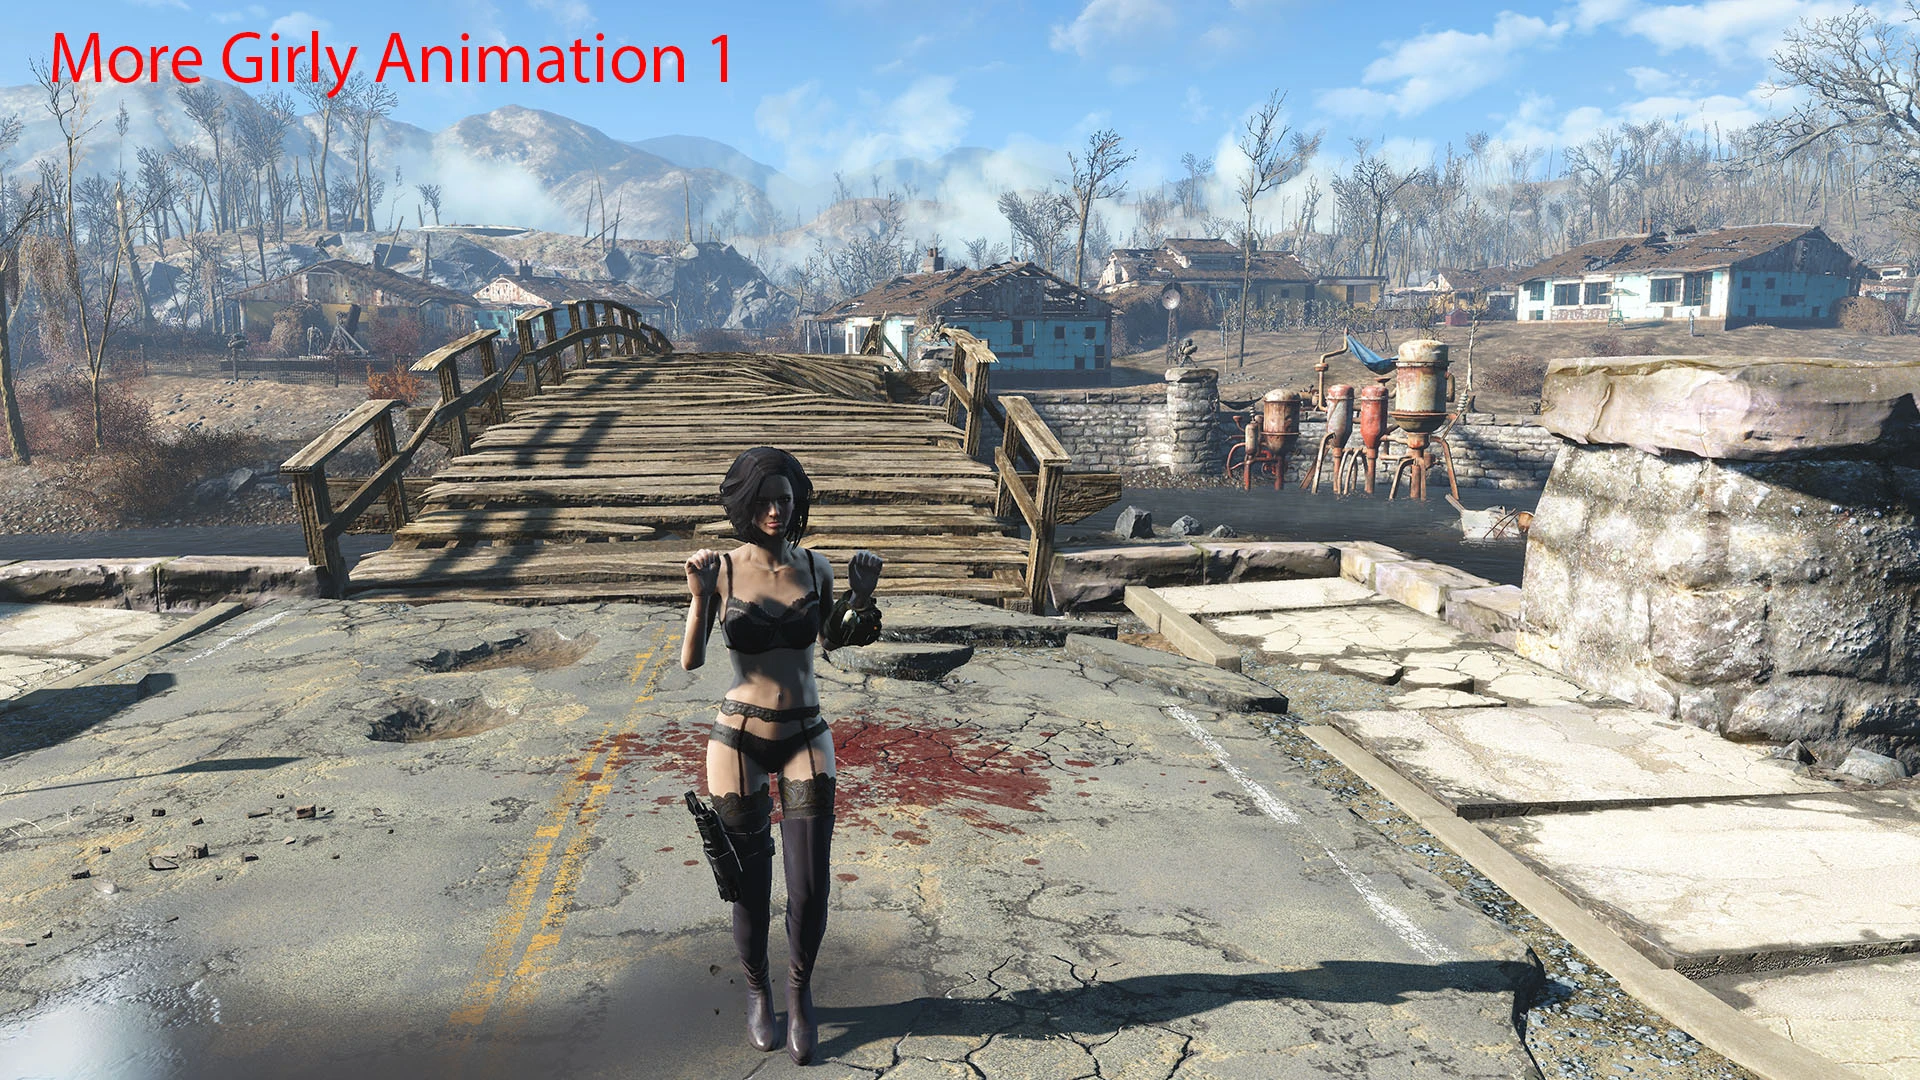 Girly Animation At Fallout 4 Nexus Mods And Community.